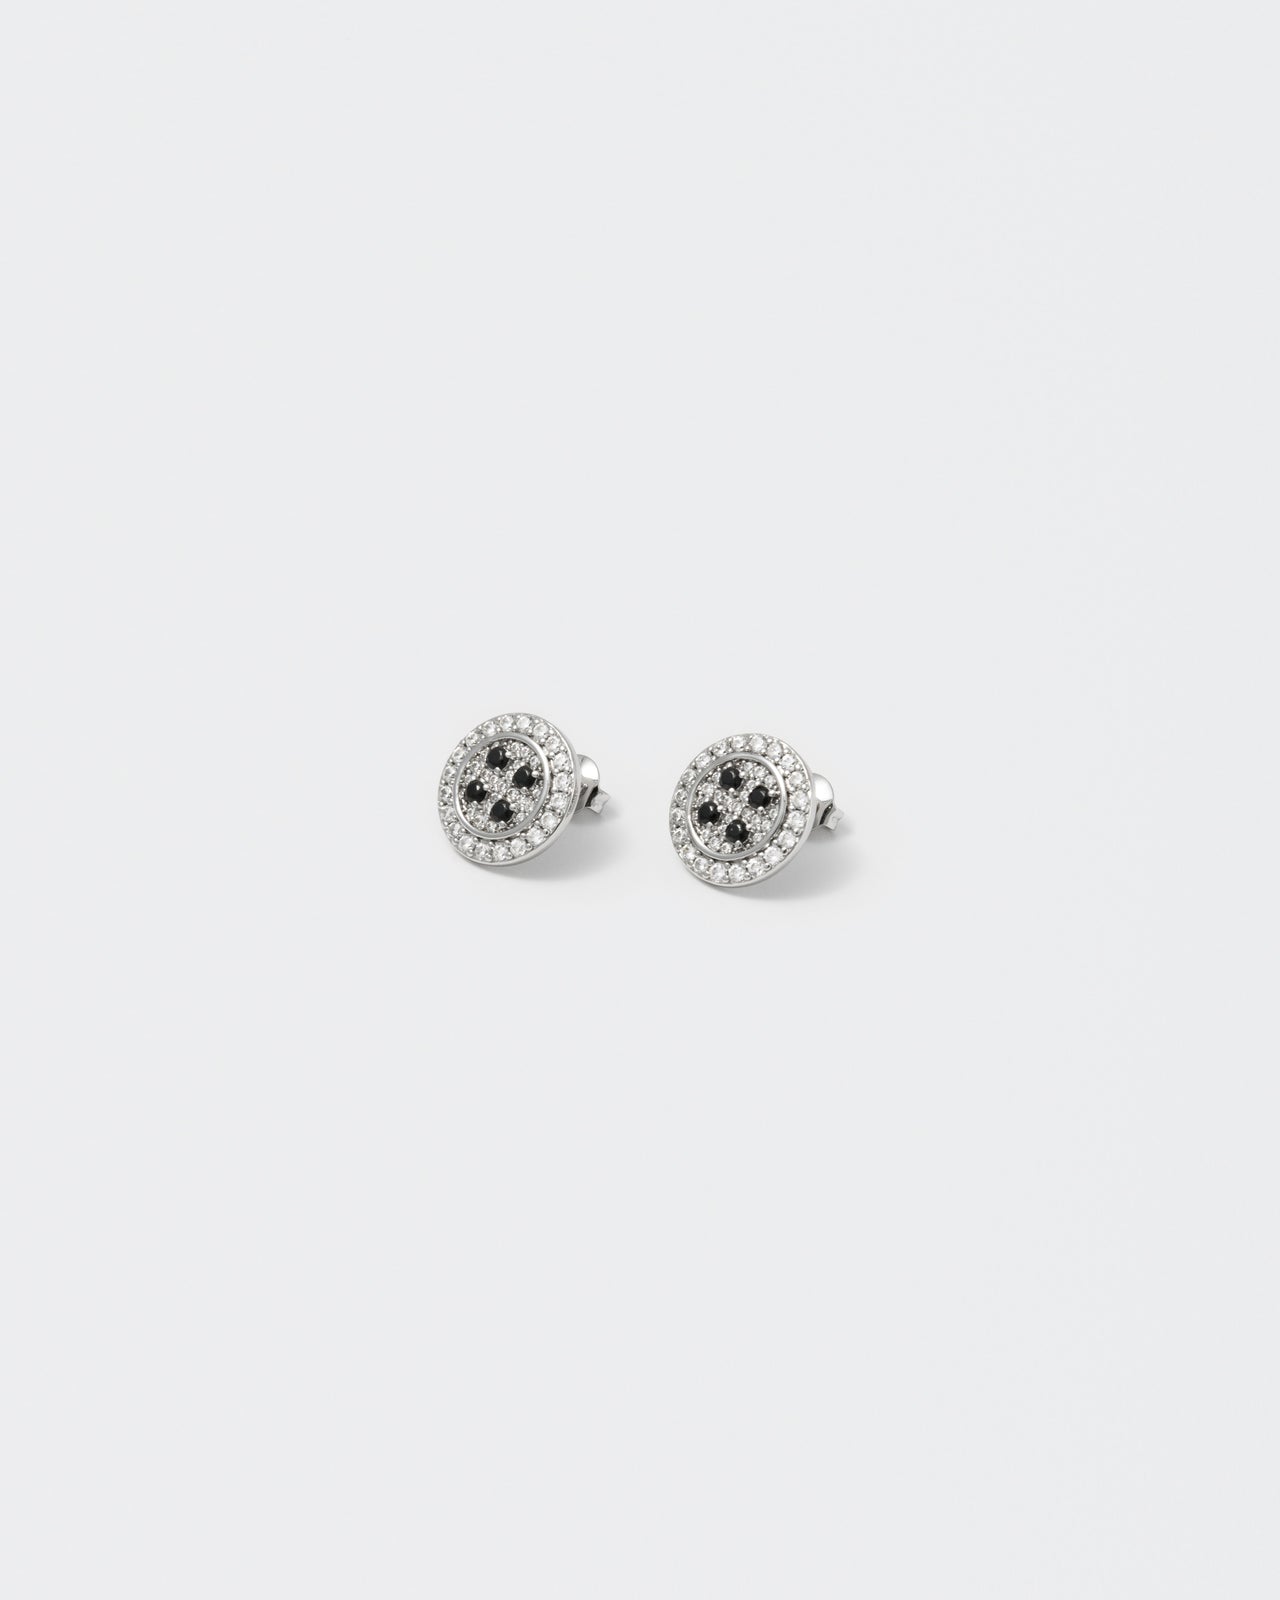 button earrings with 18kt white gold coating and hand-set micropavé in diamond white and black stones. 925 silver pin, metal realistic details and logo engraved on the back